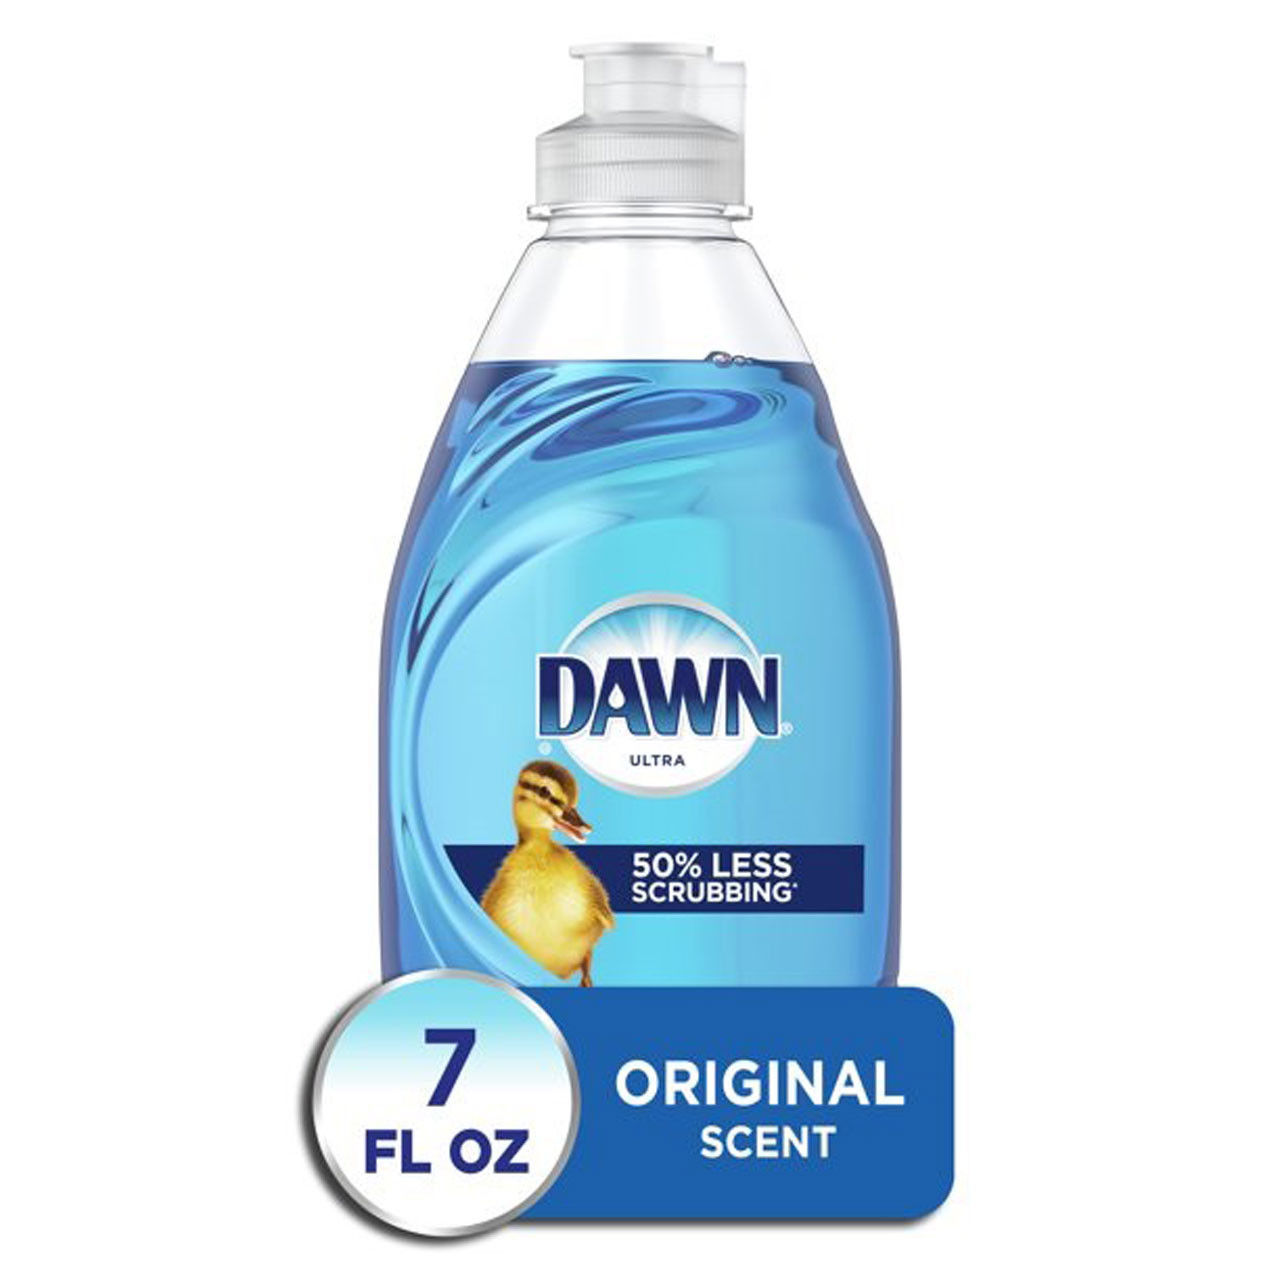 What is the size of the Dawn dish soap wholesale packaging in the Dawn Liquid Dishwashing Detergent - 18 Pack?